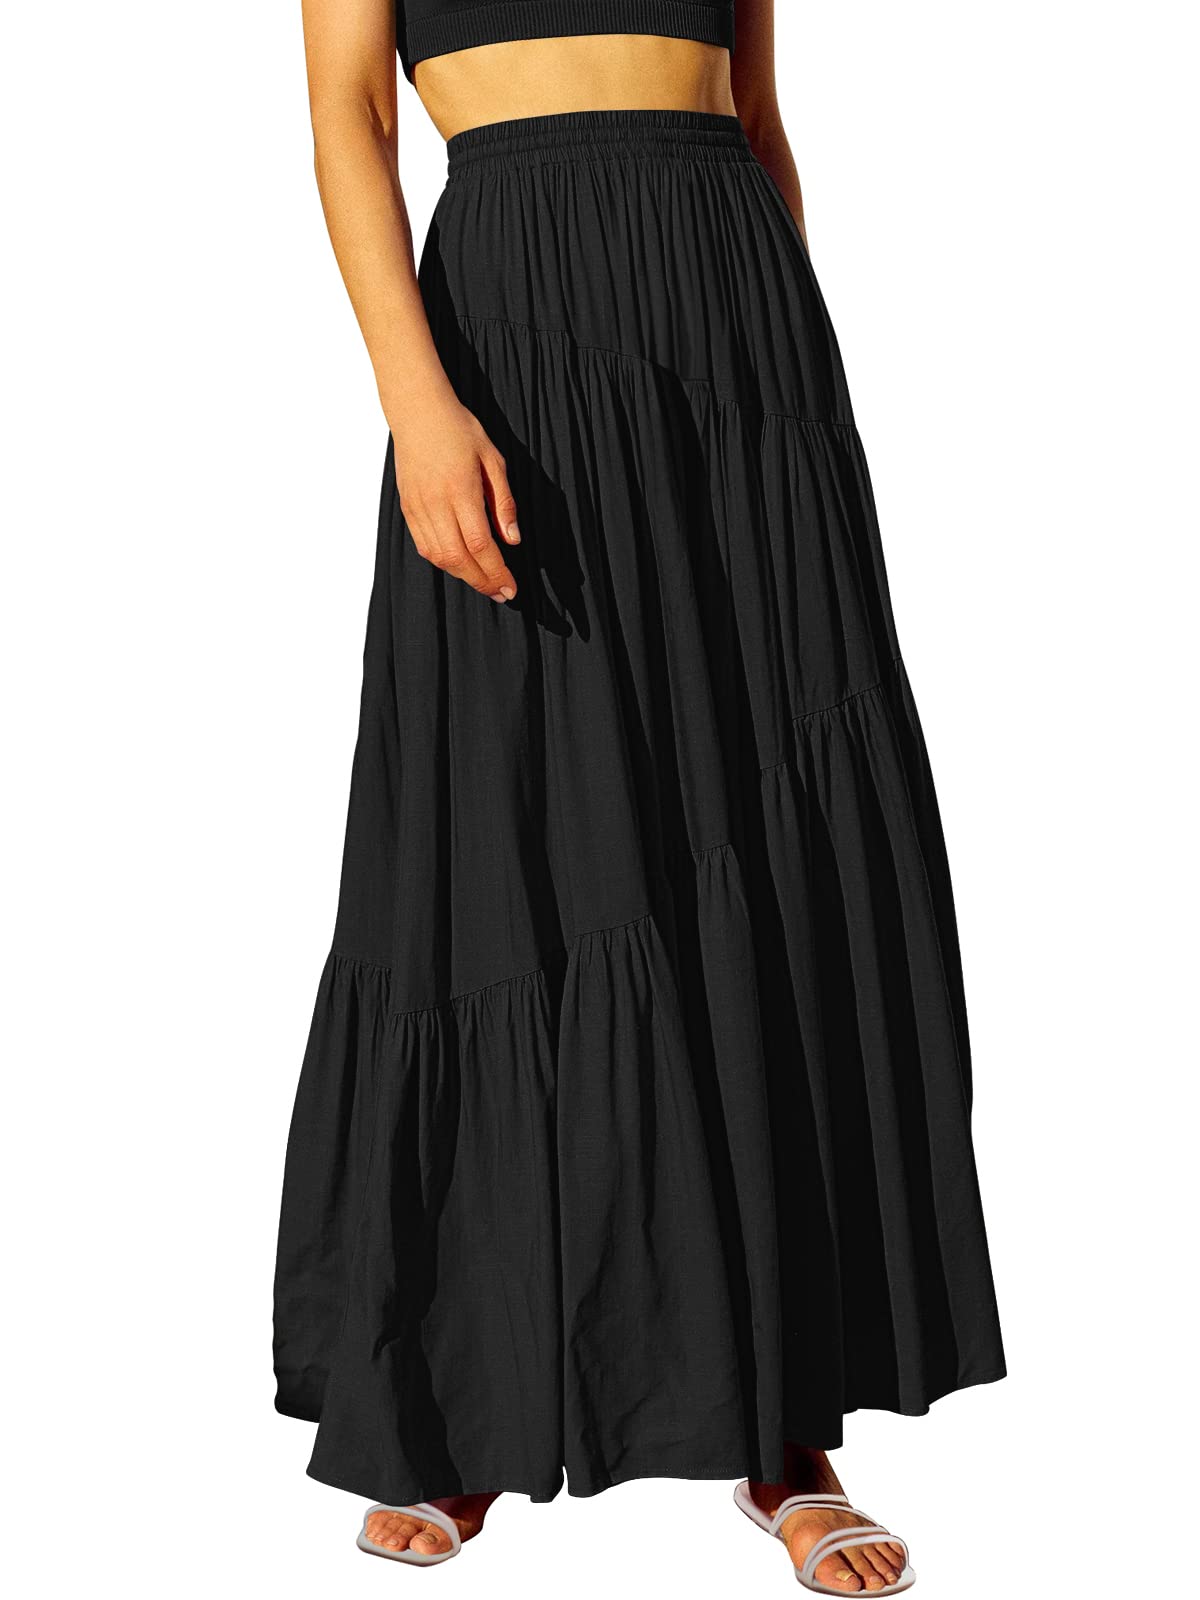 WOMEN’S ELASTIC HIGH WAIST FLOWY SWING TIERED LONG SKIRT DRESS WITH POCKETS(BUY 2 FREE SHIPPING)